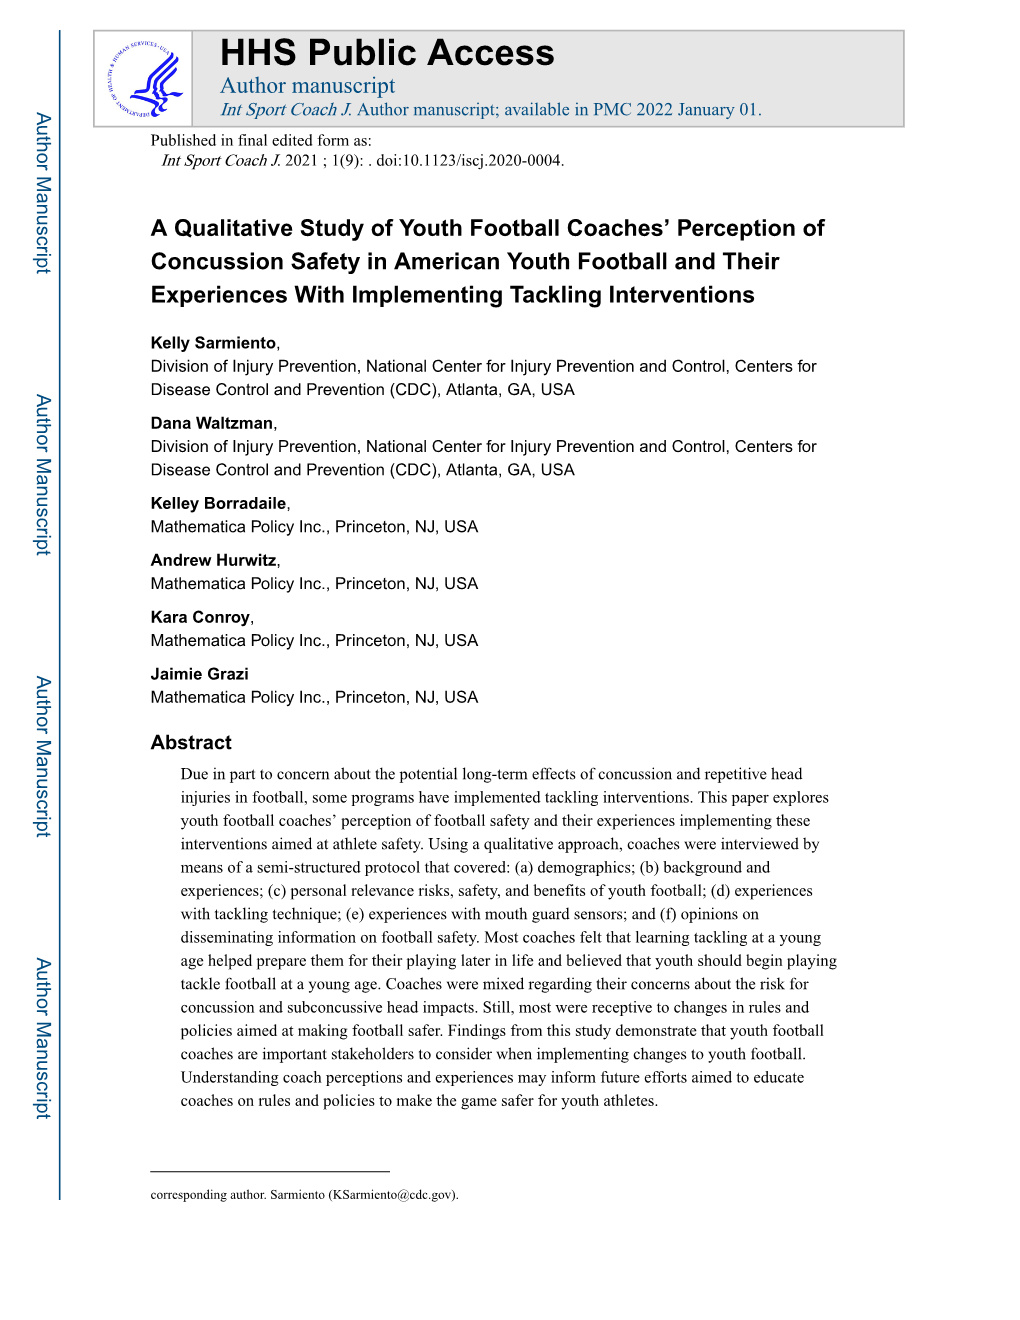 A Qualitative Study of Youth Football Coaches' Perception of Concussion